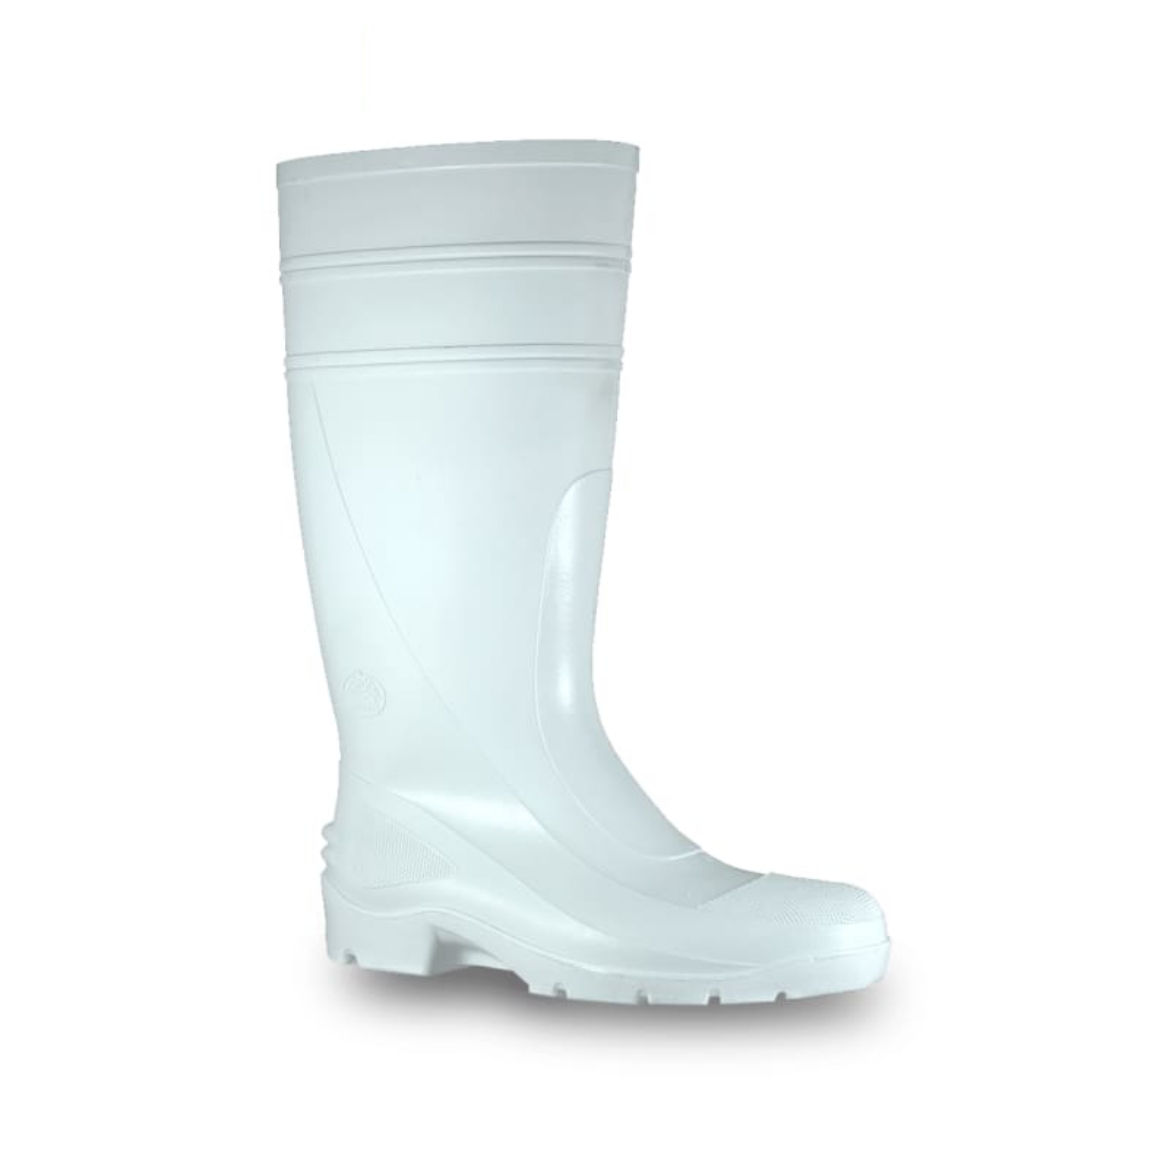 Picture of Bata Industrials, Utility, Non-Safety Boot, PVC 400mm